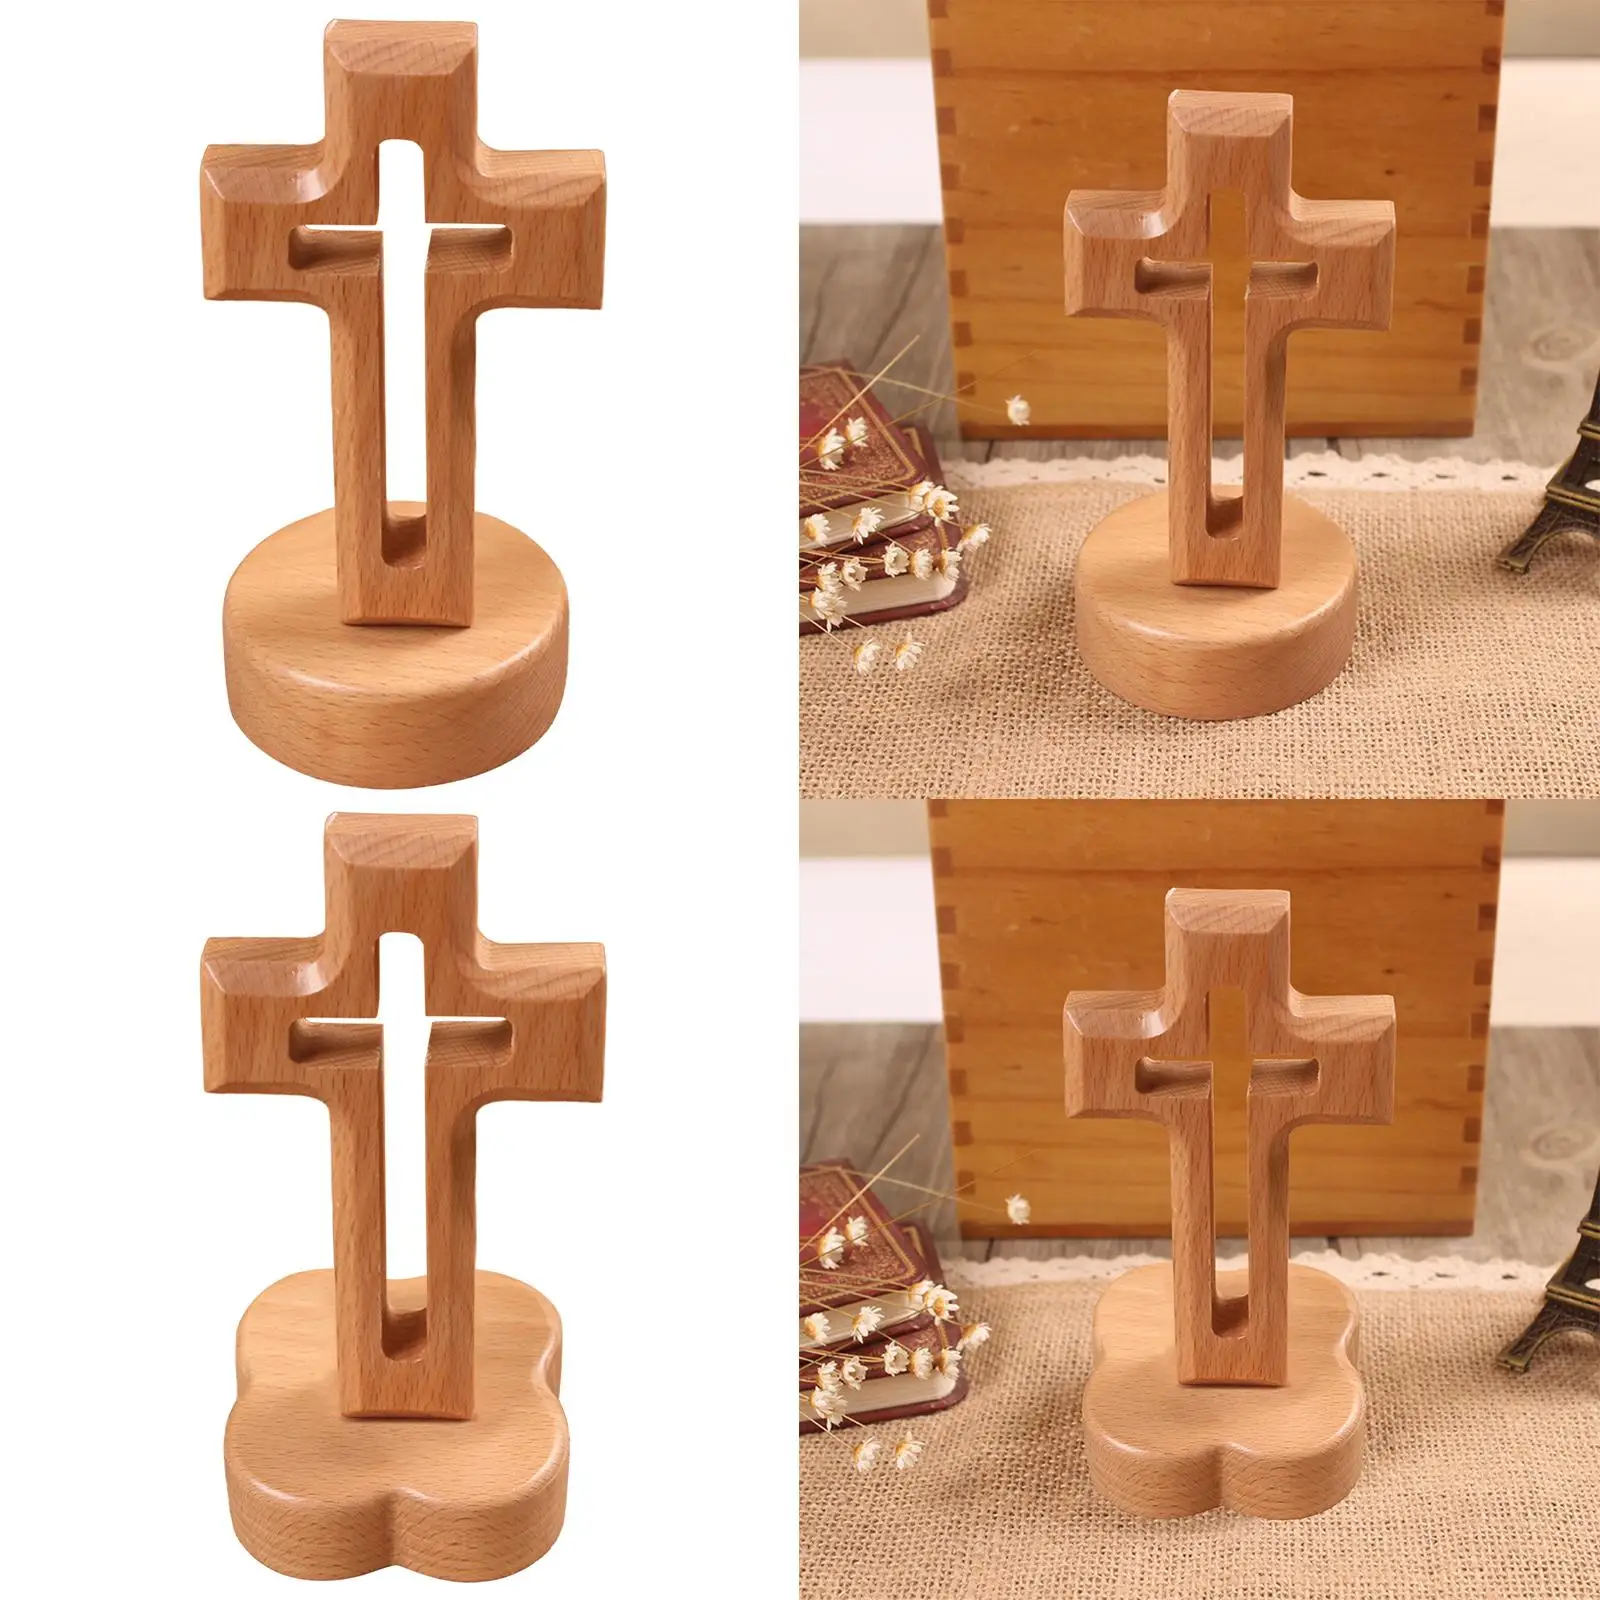 Wooden Cross Ornament Free Standing Crucifix for Living Room Bedroom Study